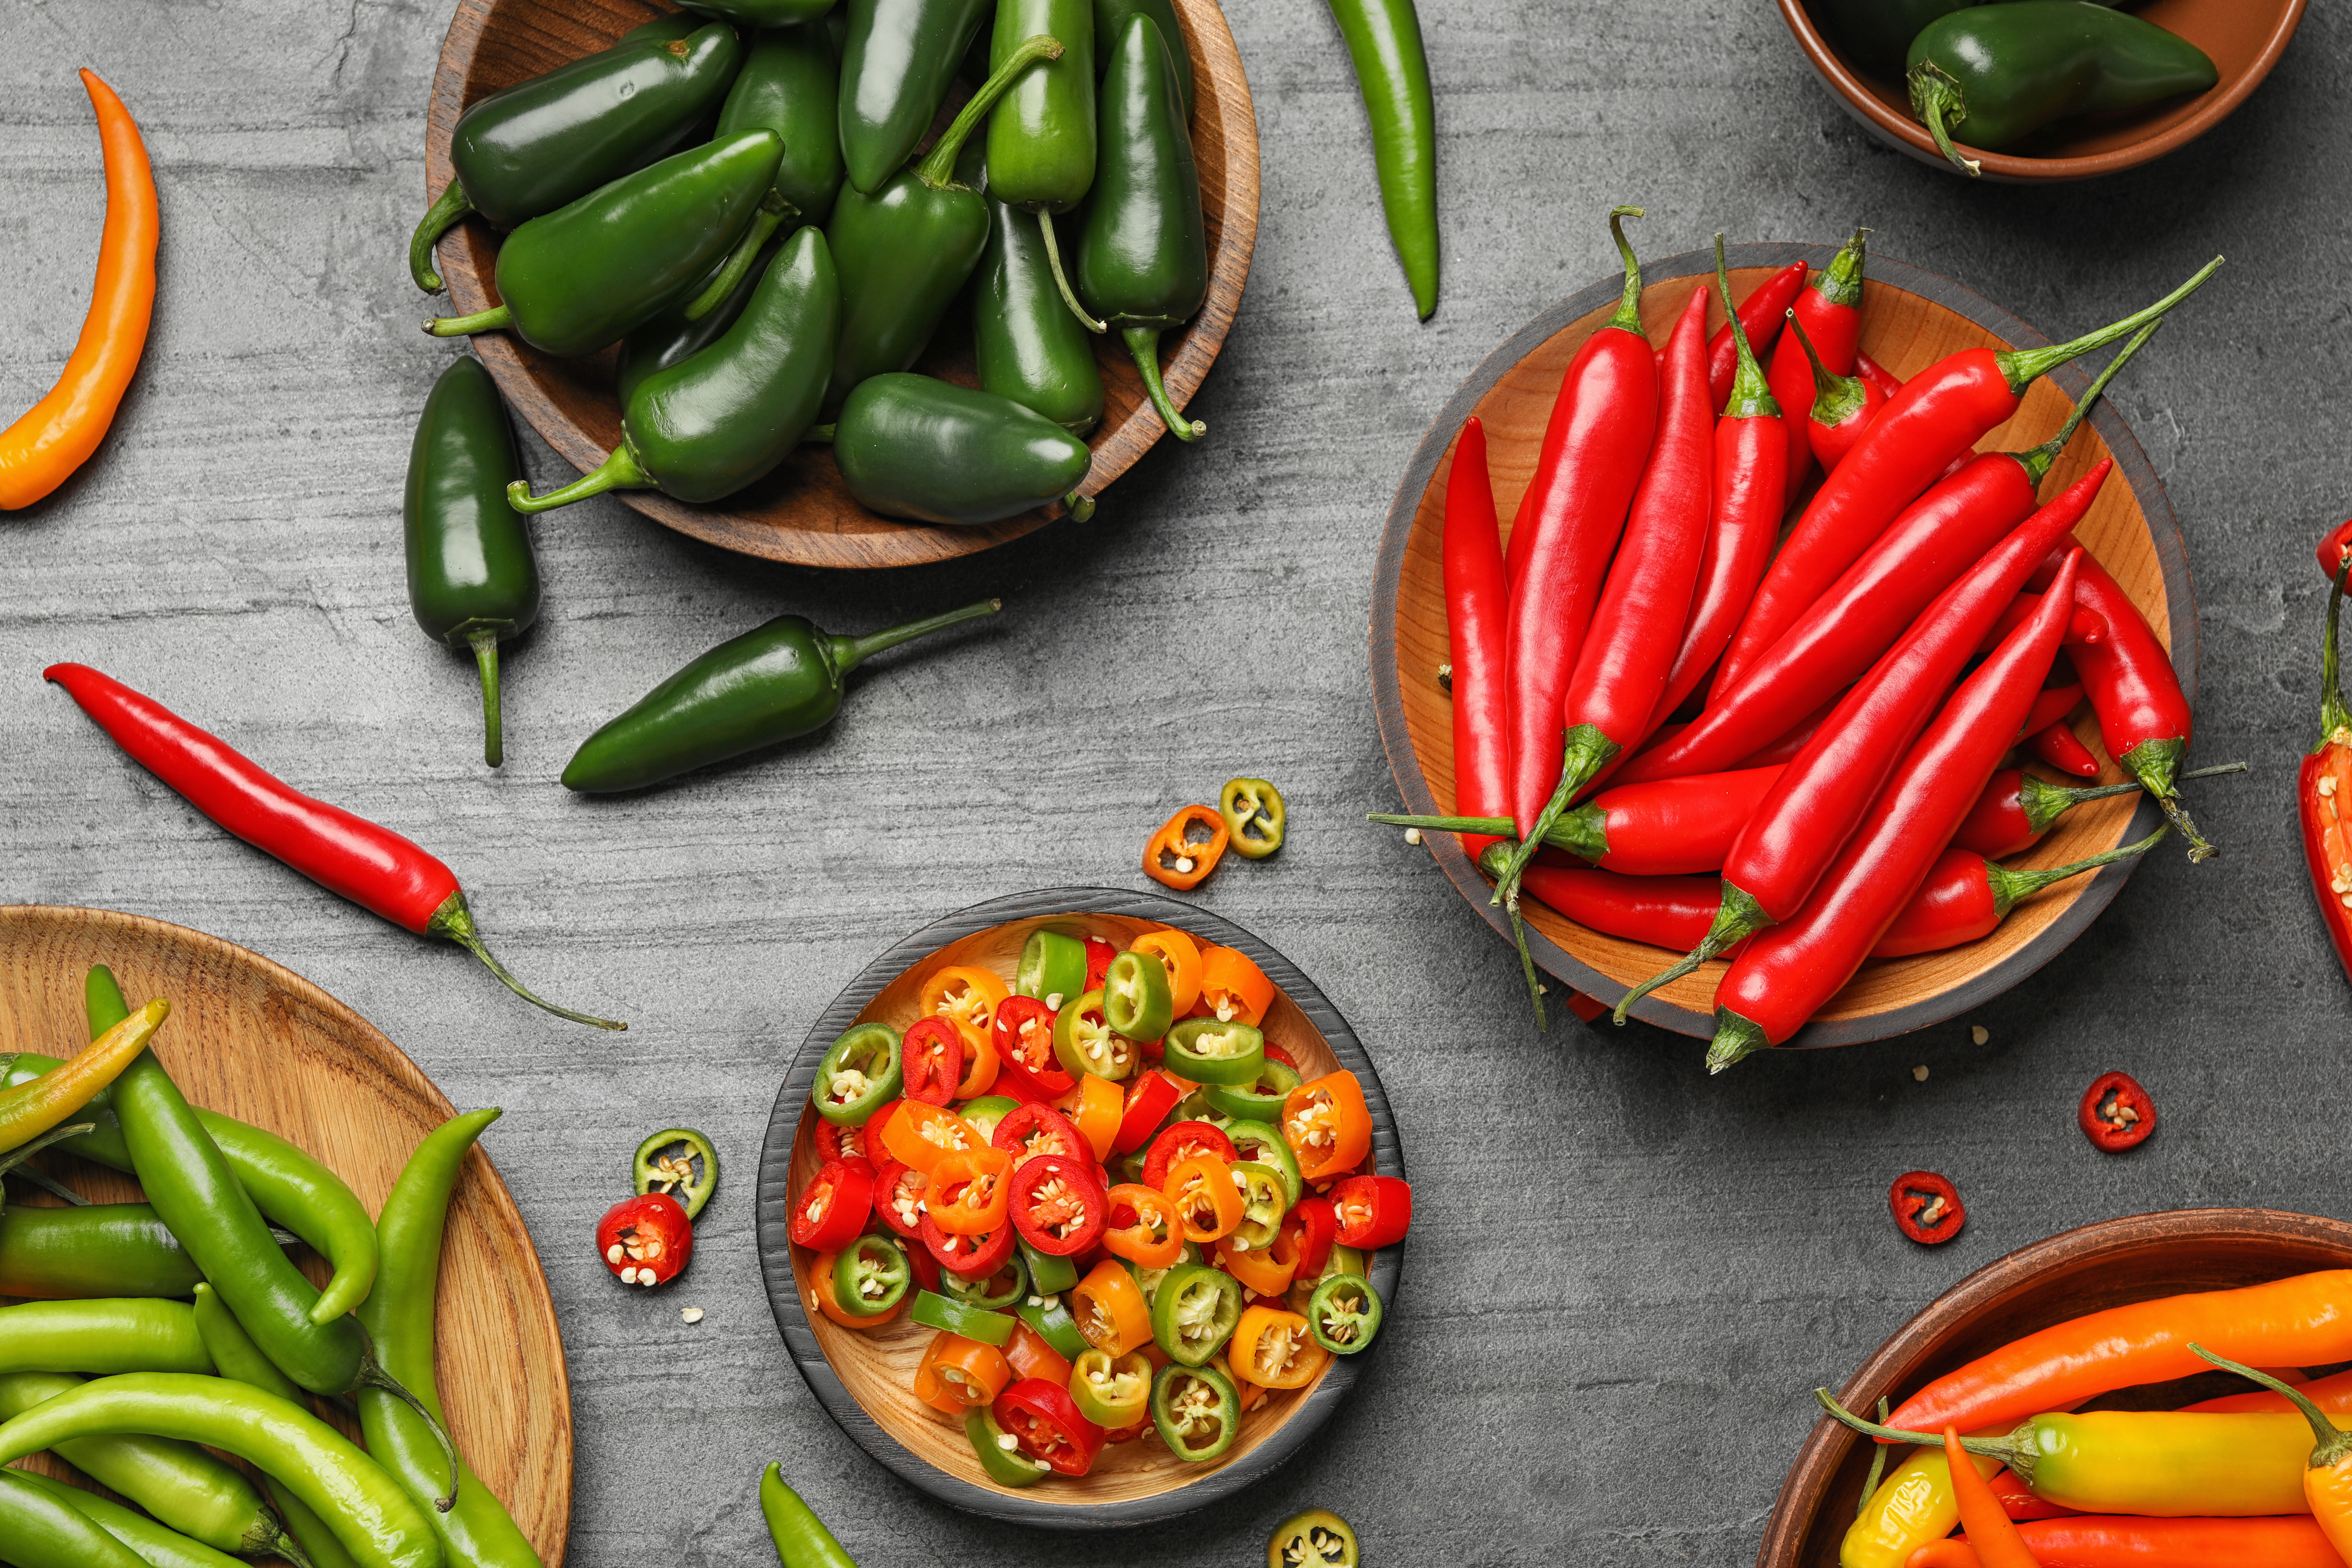 Spicy peppers | Source: Shutterstock